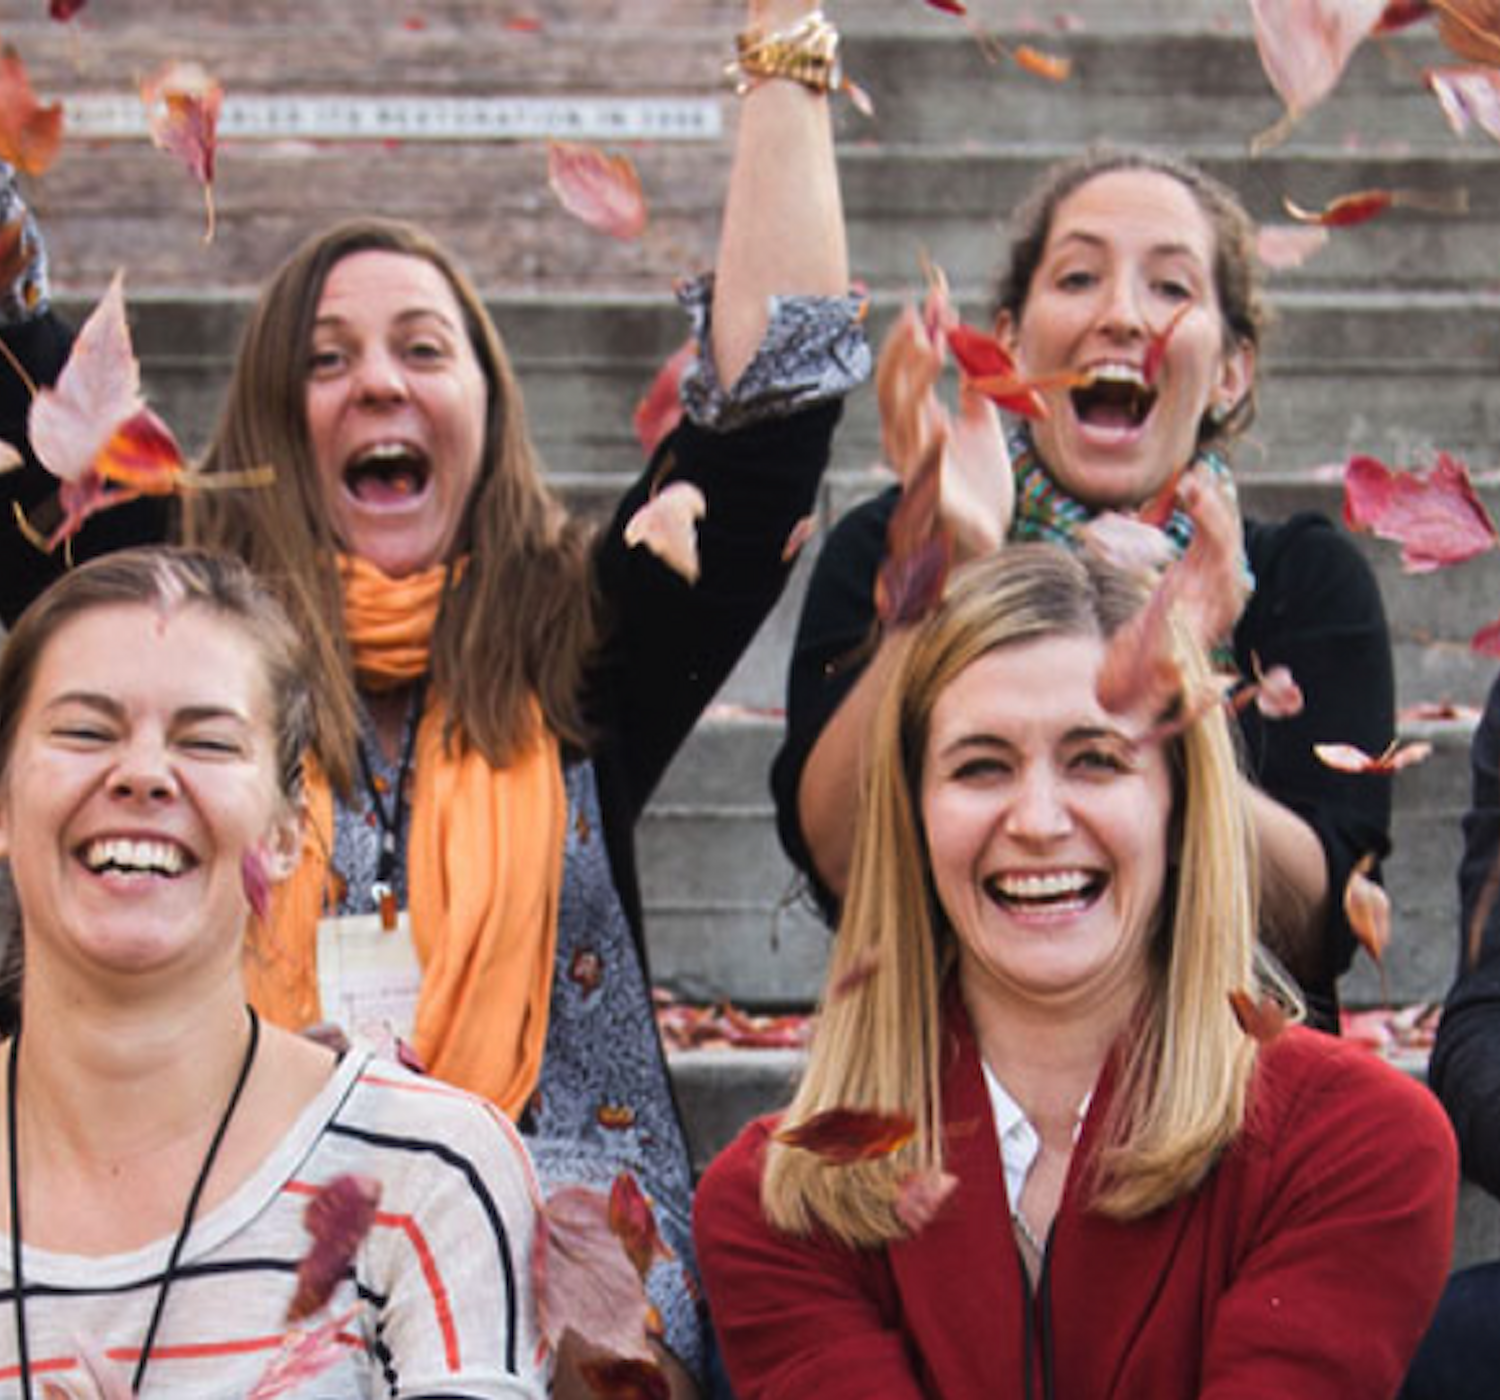 A group of people sit on stairs, smiling and laughing while tossing autumn leaves into the air, creating a joyful and playful scene.